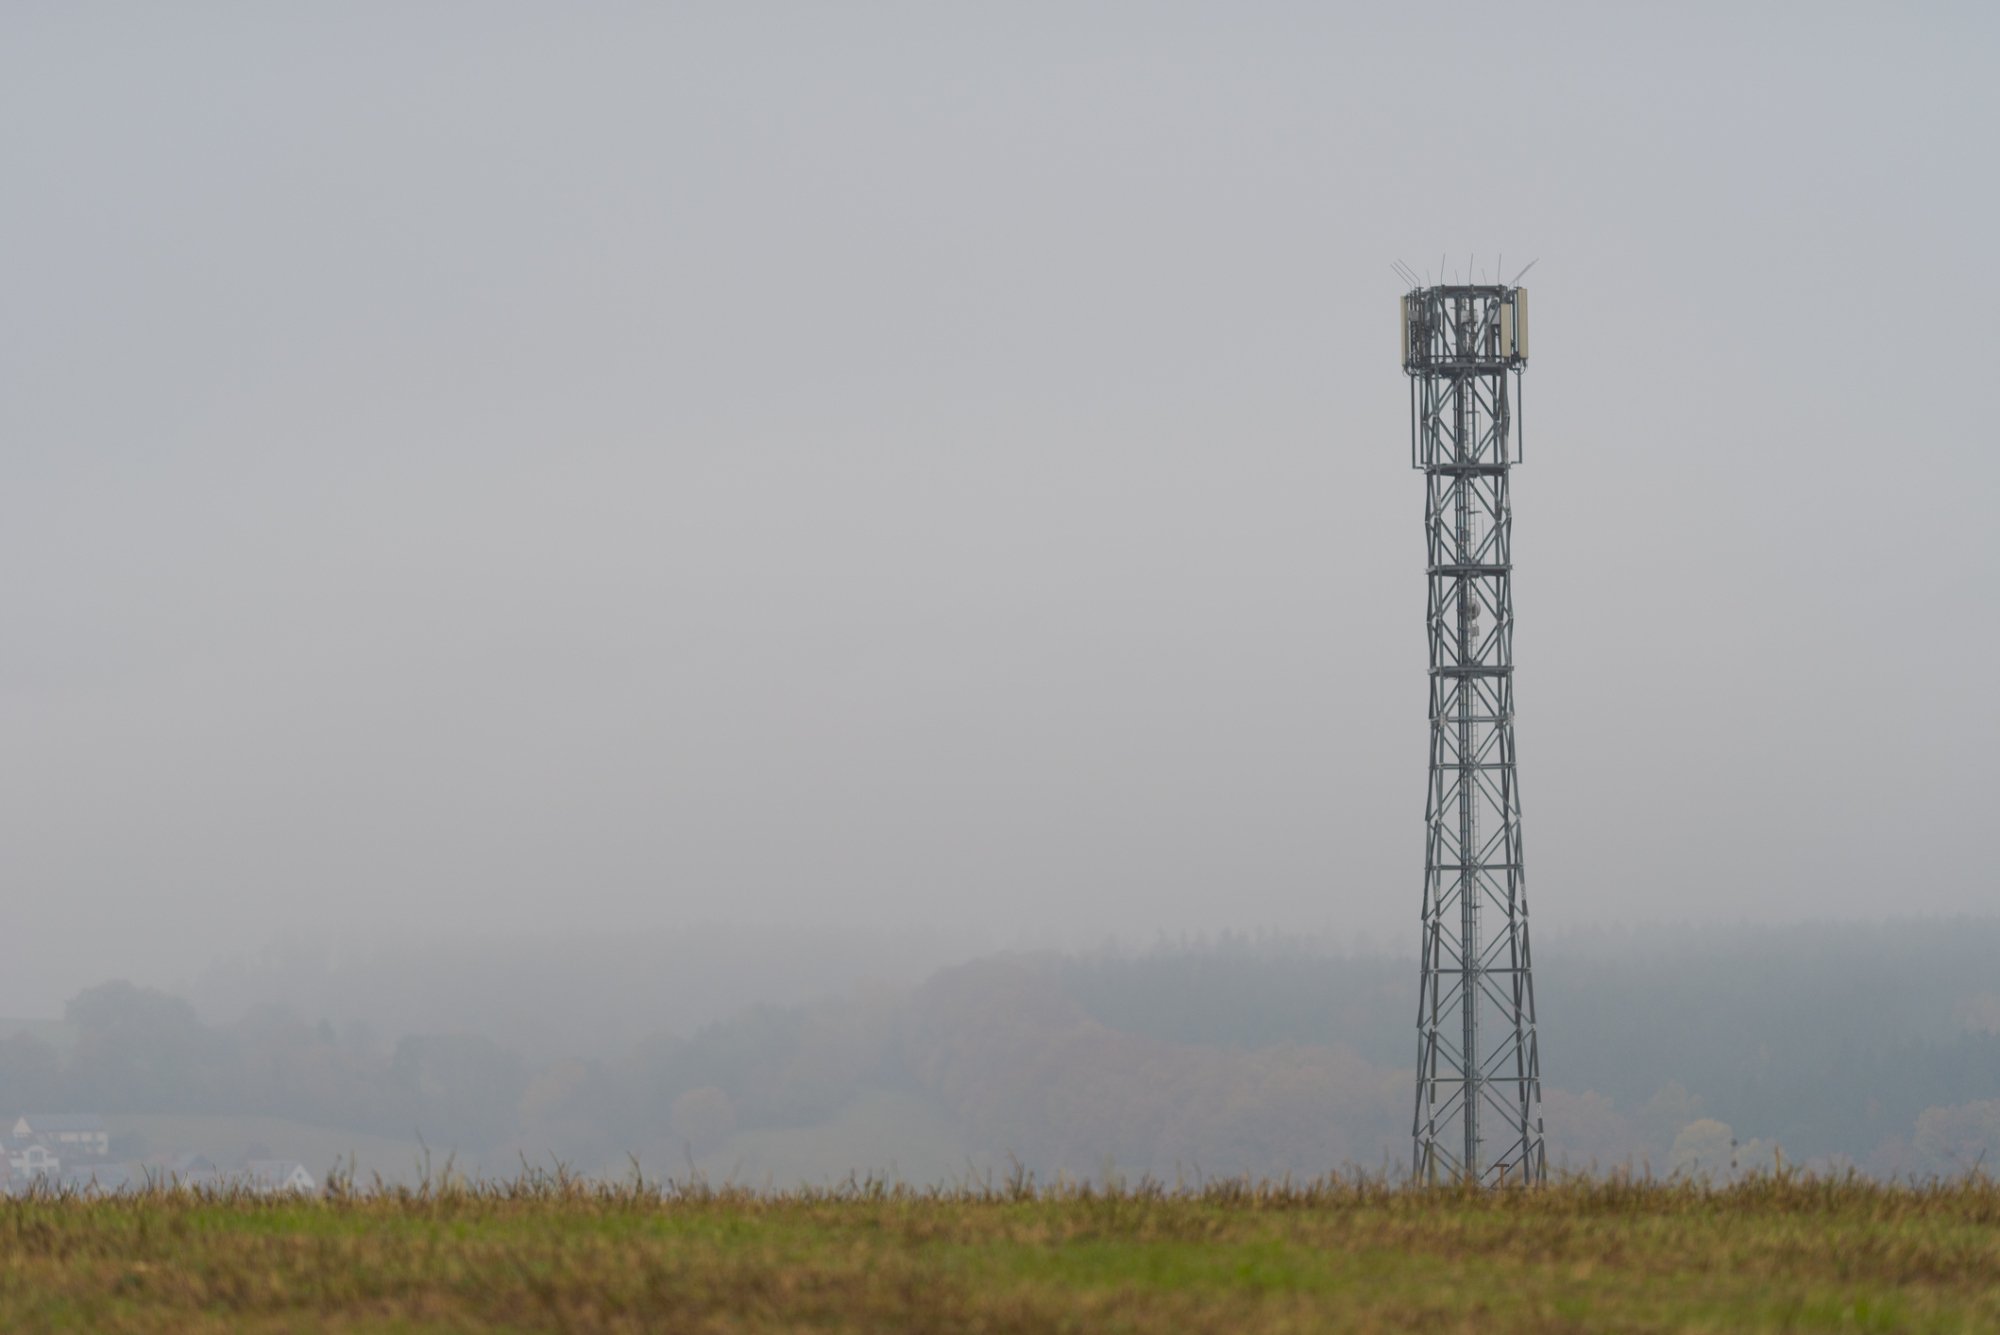 Image of mobile cell tower in a desolate field